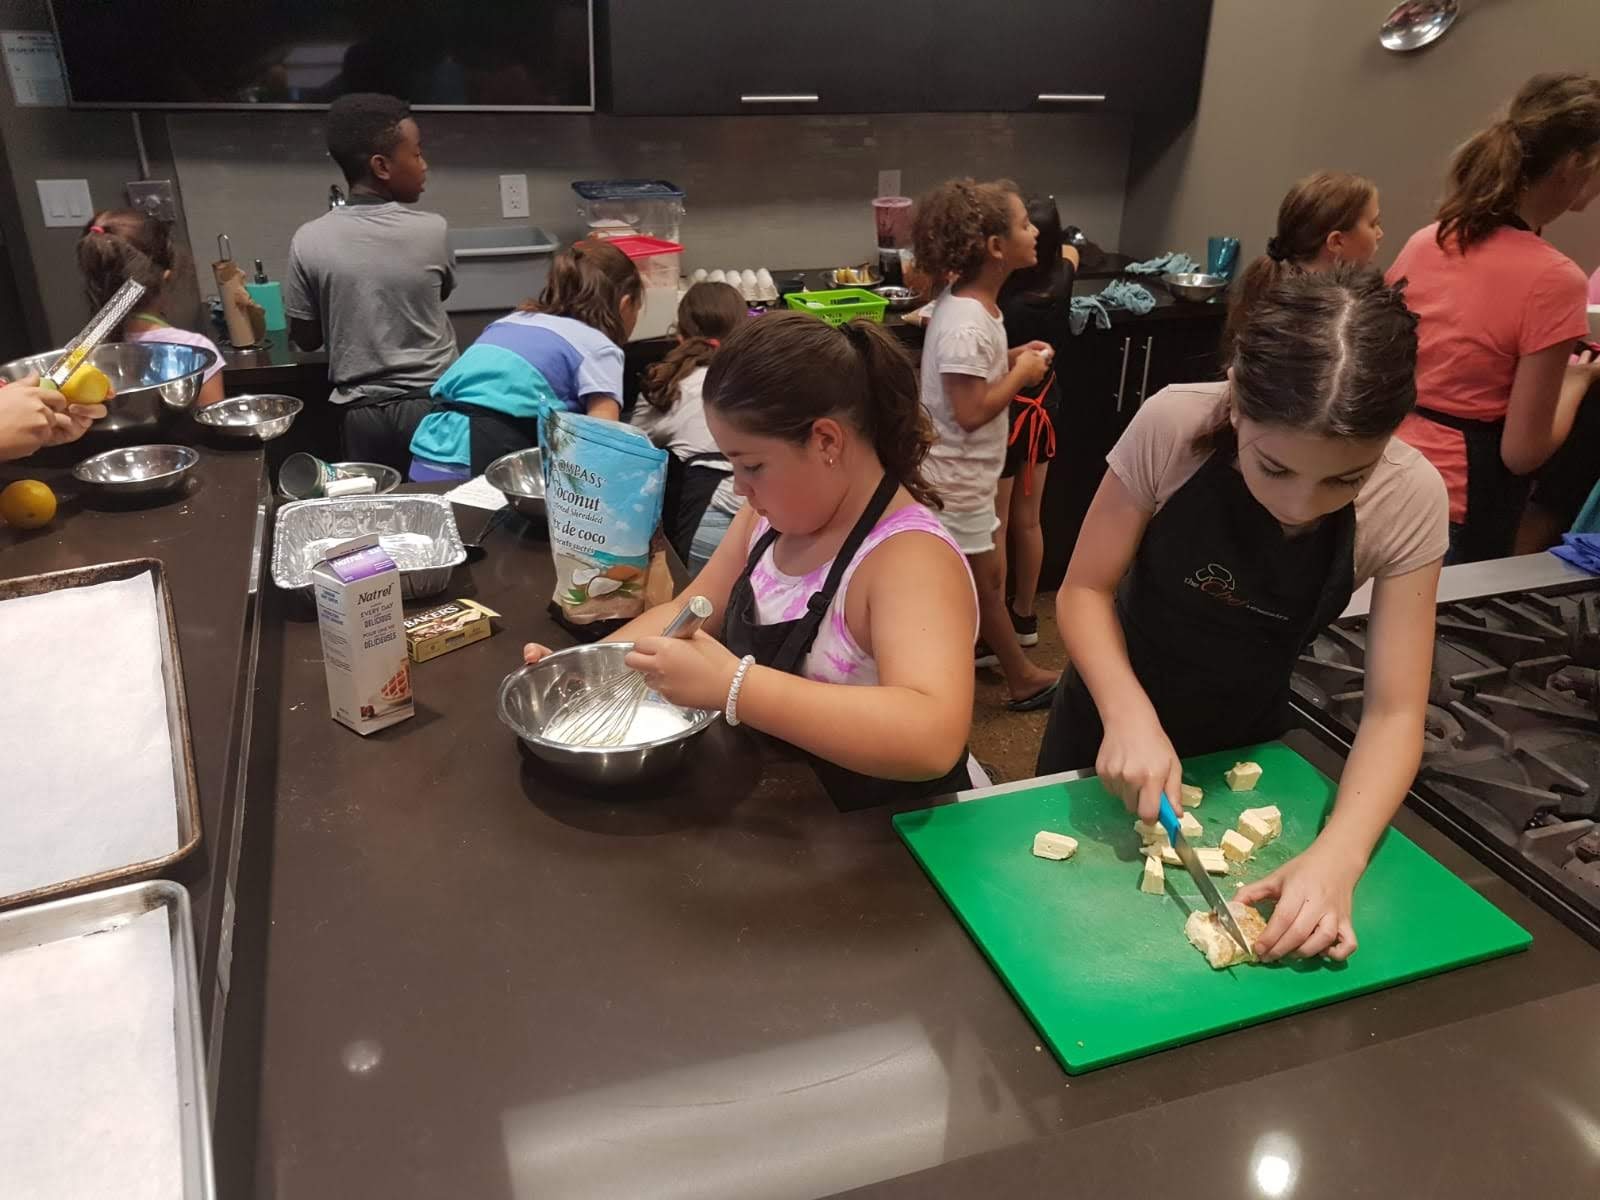 Midtown - Teen Cooking Classes - 8 week session - Tuesday January 7 - Tuesday March 3 2021